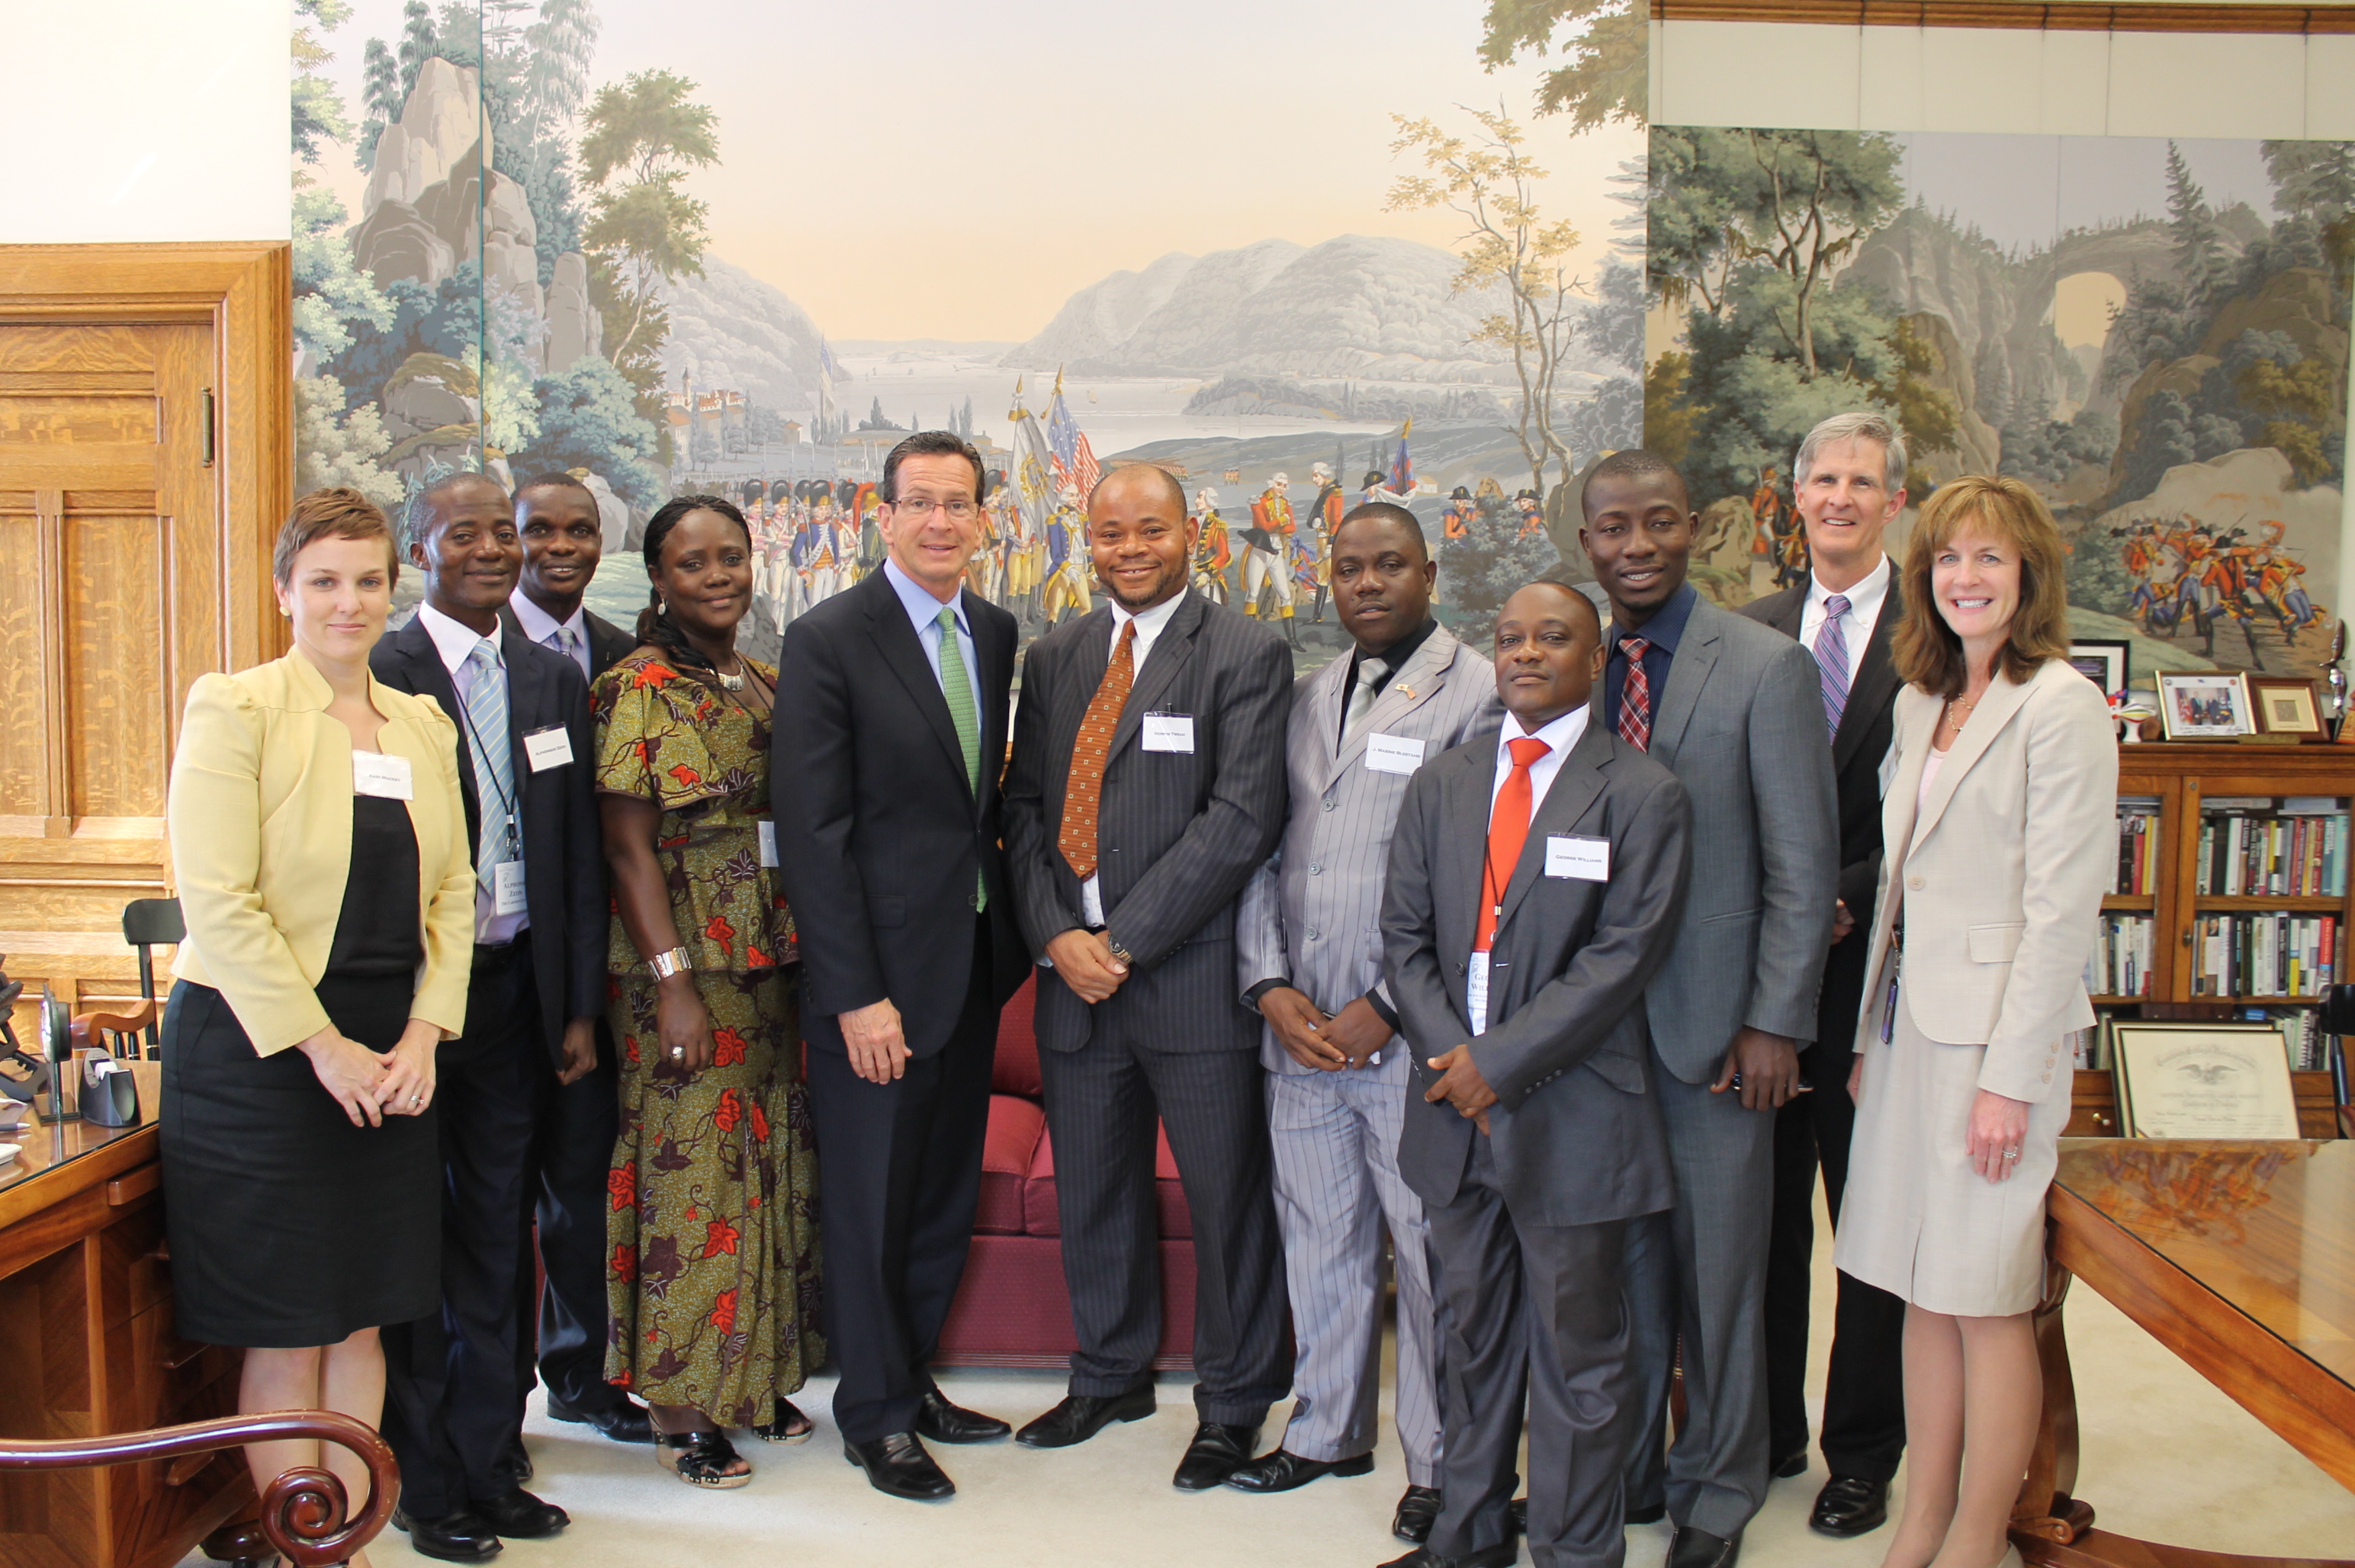 Dannel Malloy (center) met with a group of Liberian governmental officials and representatives from the Carter Center during their visit to study Connecticut’s open government laws on June 3 – 4, 2013.    Also pictured are Owen Eagan, FOI Commissioner, and Colleen Murphy, Executive Director and General Counsel of the FOI Commission.